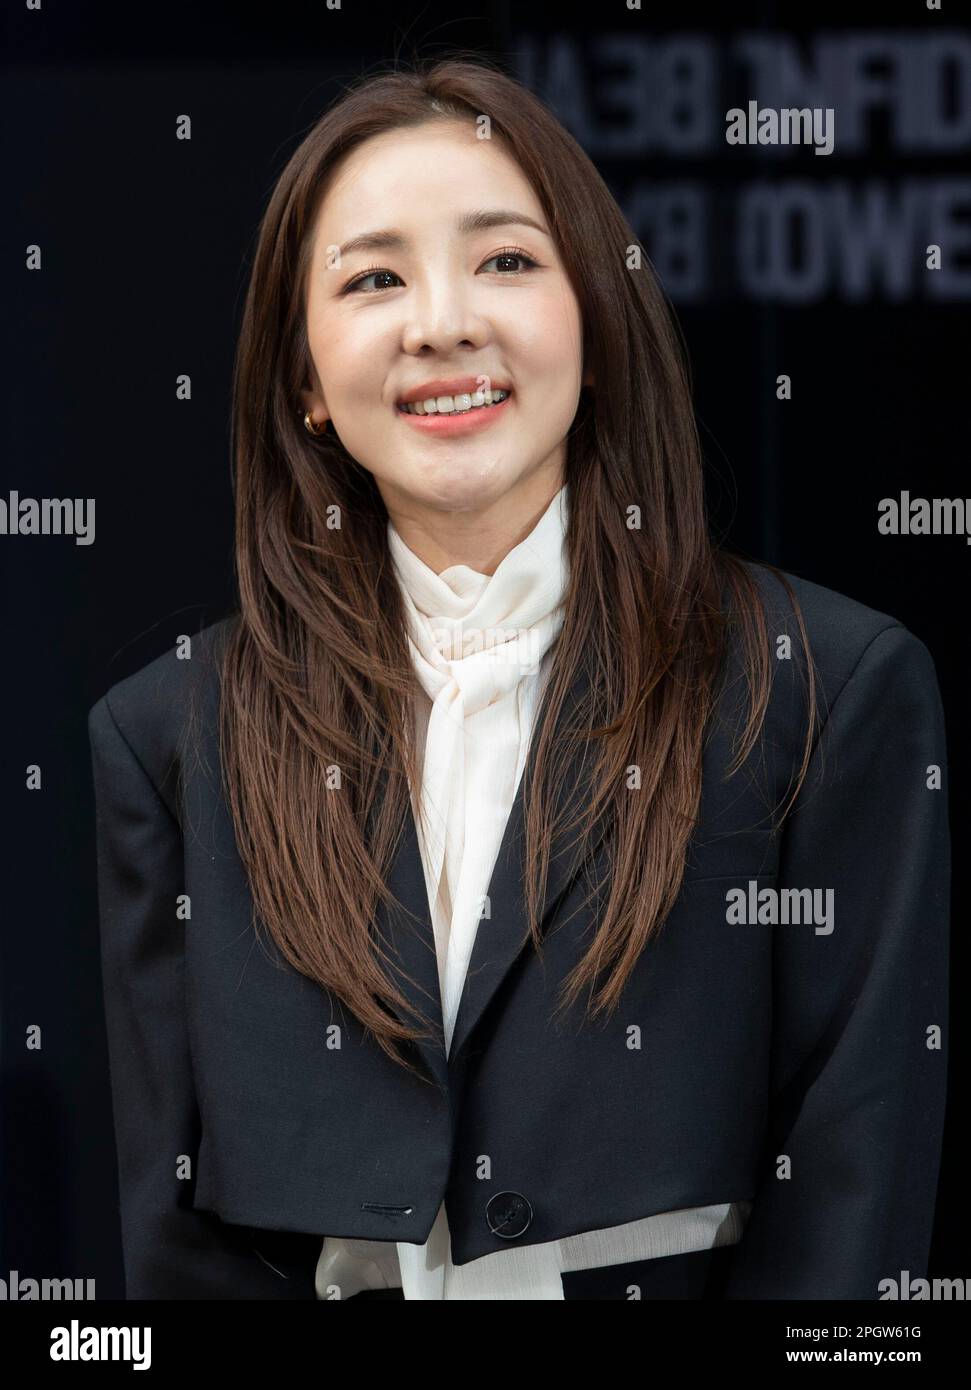 24 March 2023 – Seoul, South Korea: South Korean singer and actress Sandara Park, attends the photocall for the 'Bobby Brown' pop-up store opening event in Seoul, South Korea on March 24, 2023. (Photo by Lee Young-ho/Sipa USA) Stock Photo